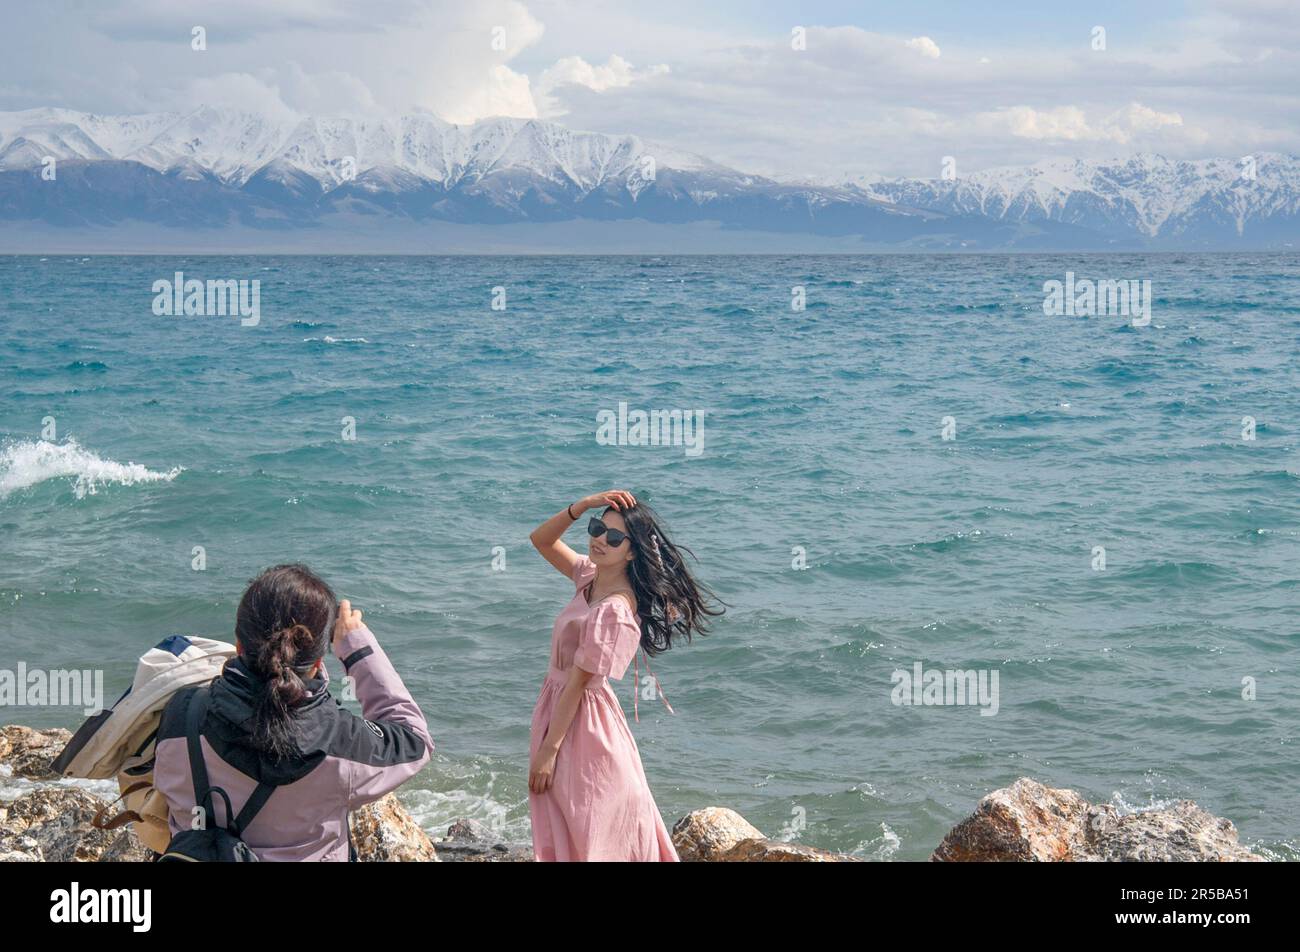 (230602) -- URUMQI, June 2, 2023 (Xinhua) -- A tourist poses for photos by the Sayram Lake in northwest China's Xinjiang Uygur Autonomous Region, May 21, 2023. According to comprehensive calculation through a big data platform for tourism statistics and sample survey, from January to April 2023, Xinjiang received over 51.19 million tourists, a year-on-year increase of 29.56%. Meanwhile, tourism revenue reached 42.64 billion yuan (about 6.03 billion U.S. dollars), up 60.59% year on year. (Xinhua/Wang Fei) Stock Photo